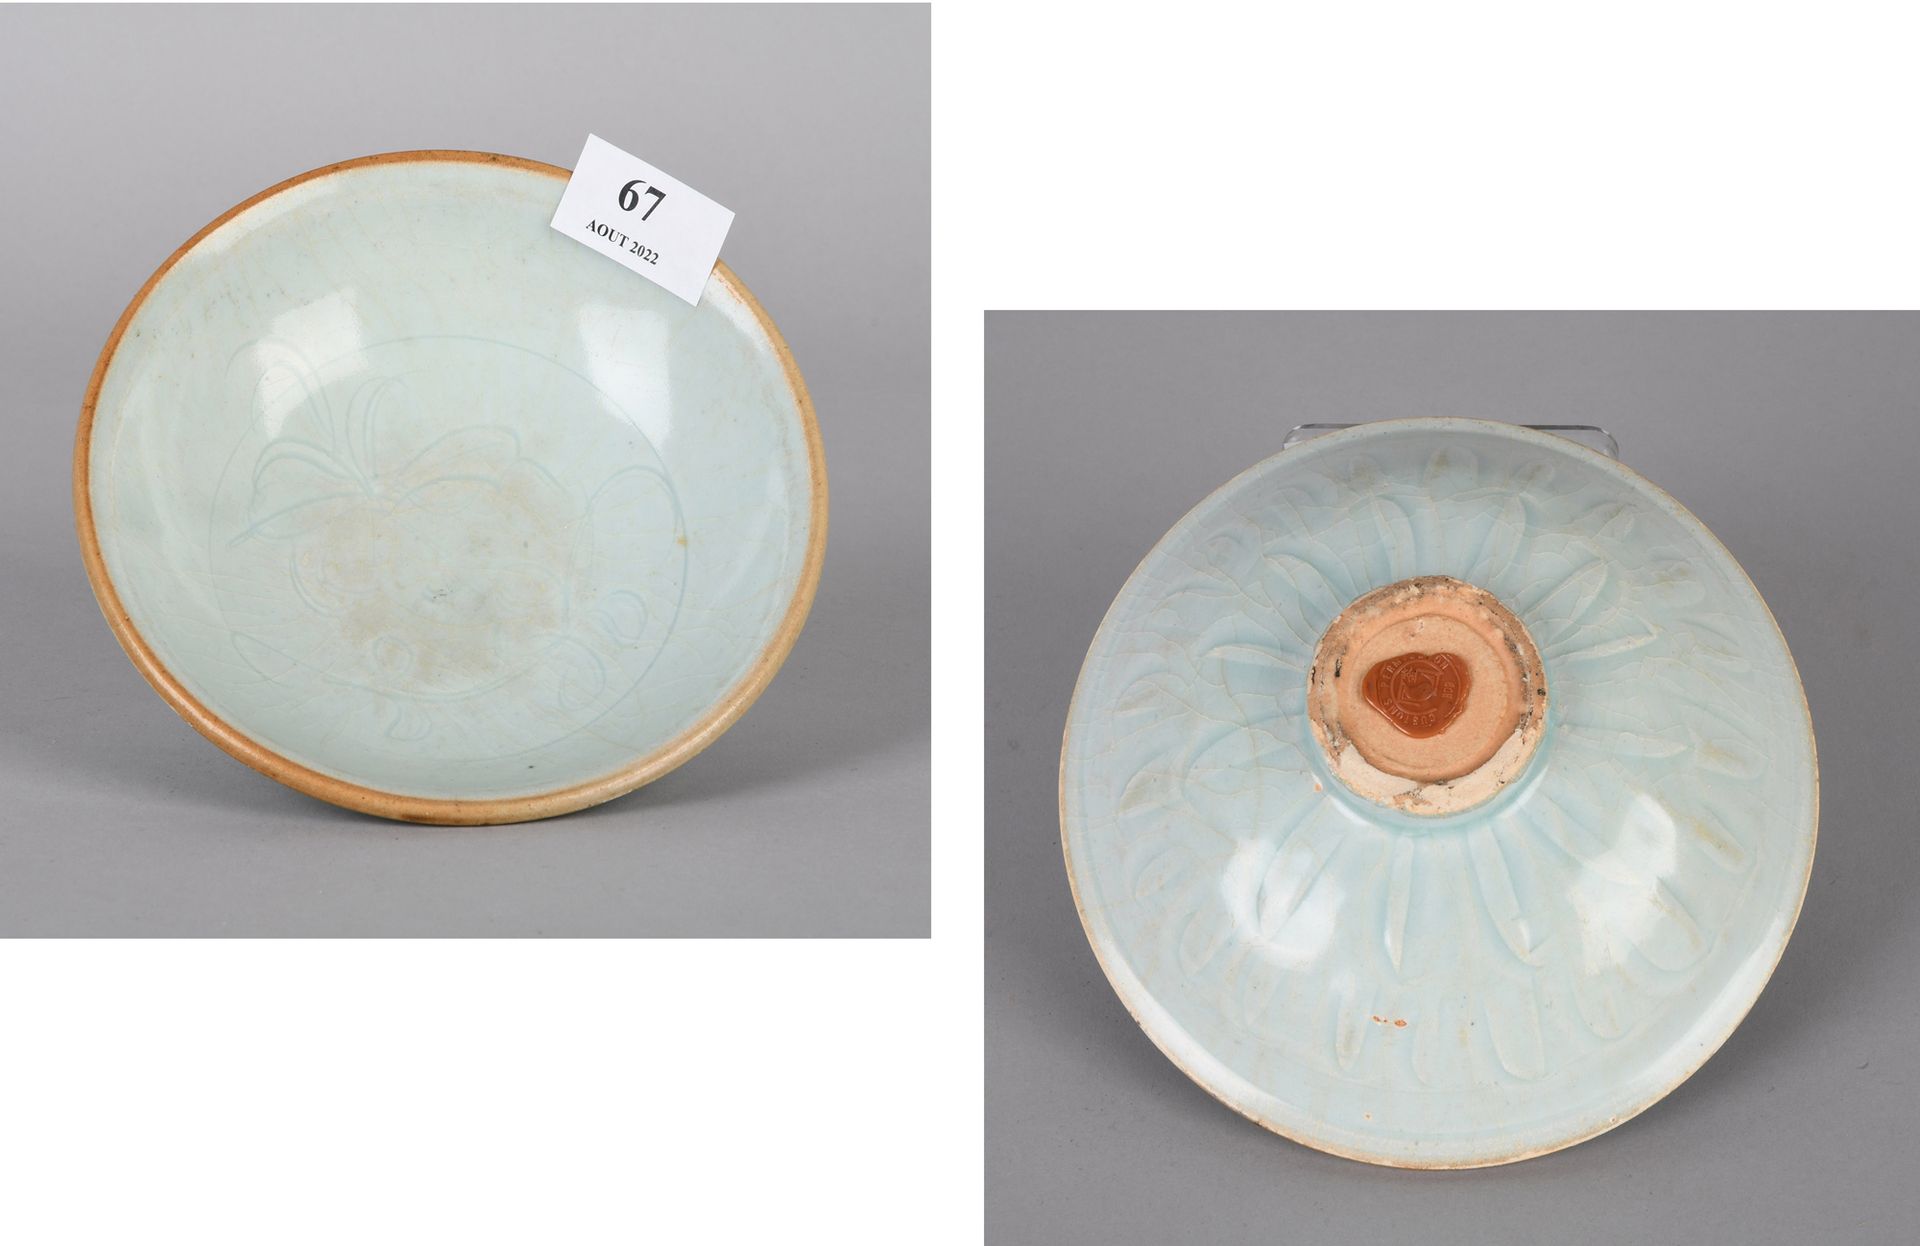 China, Song period (967-1279) 
Terracotta bowl with celadon green glaze decorate&hellip;